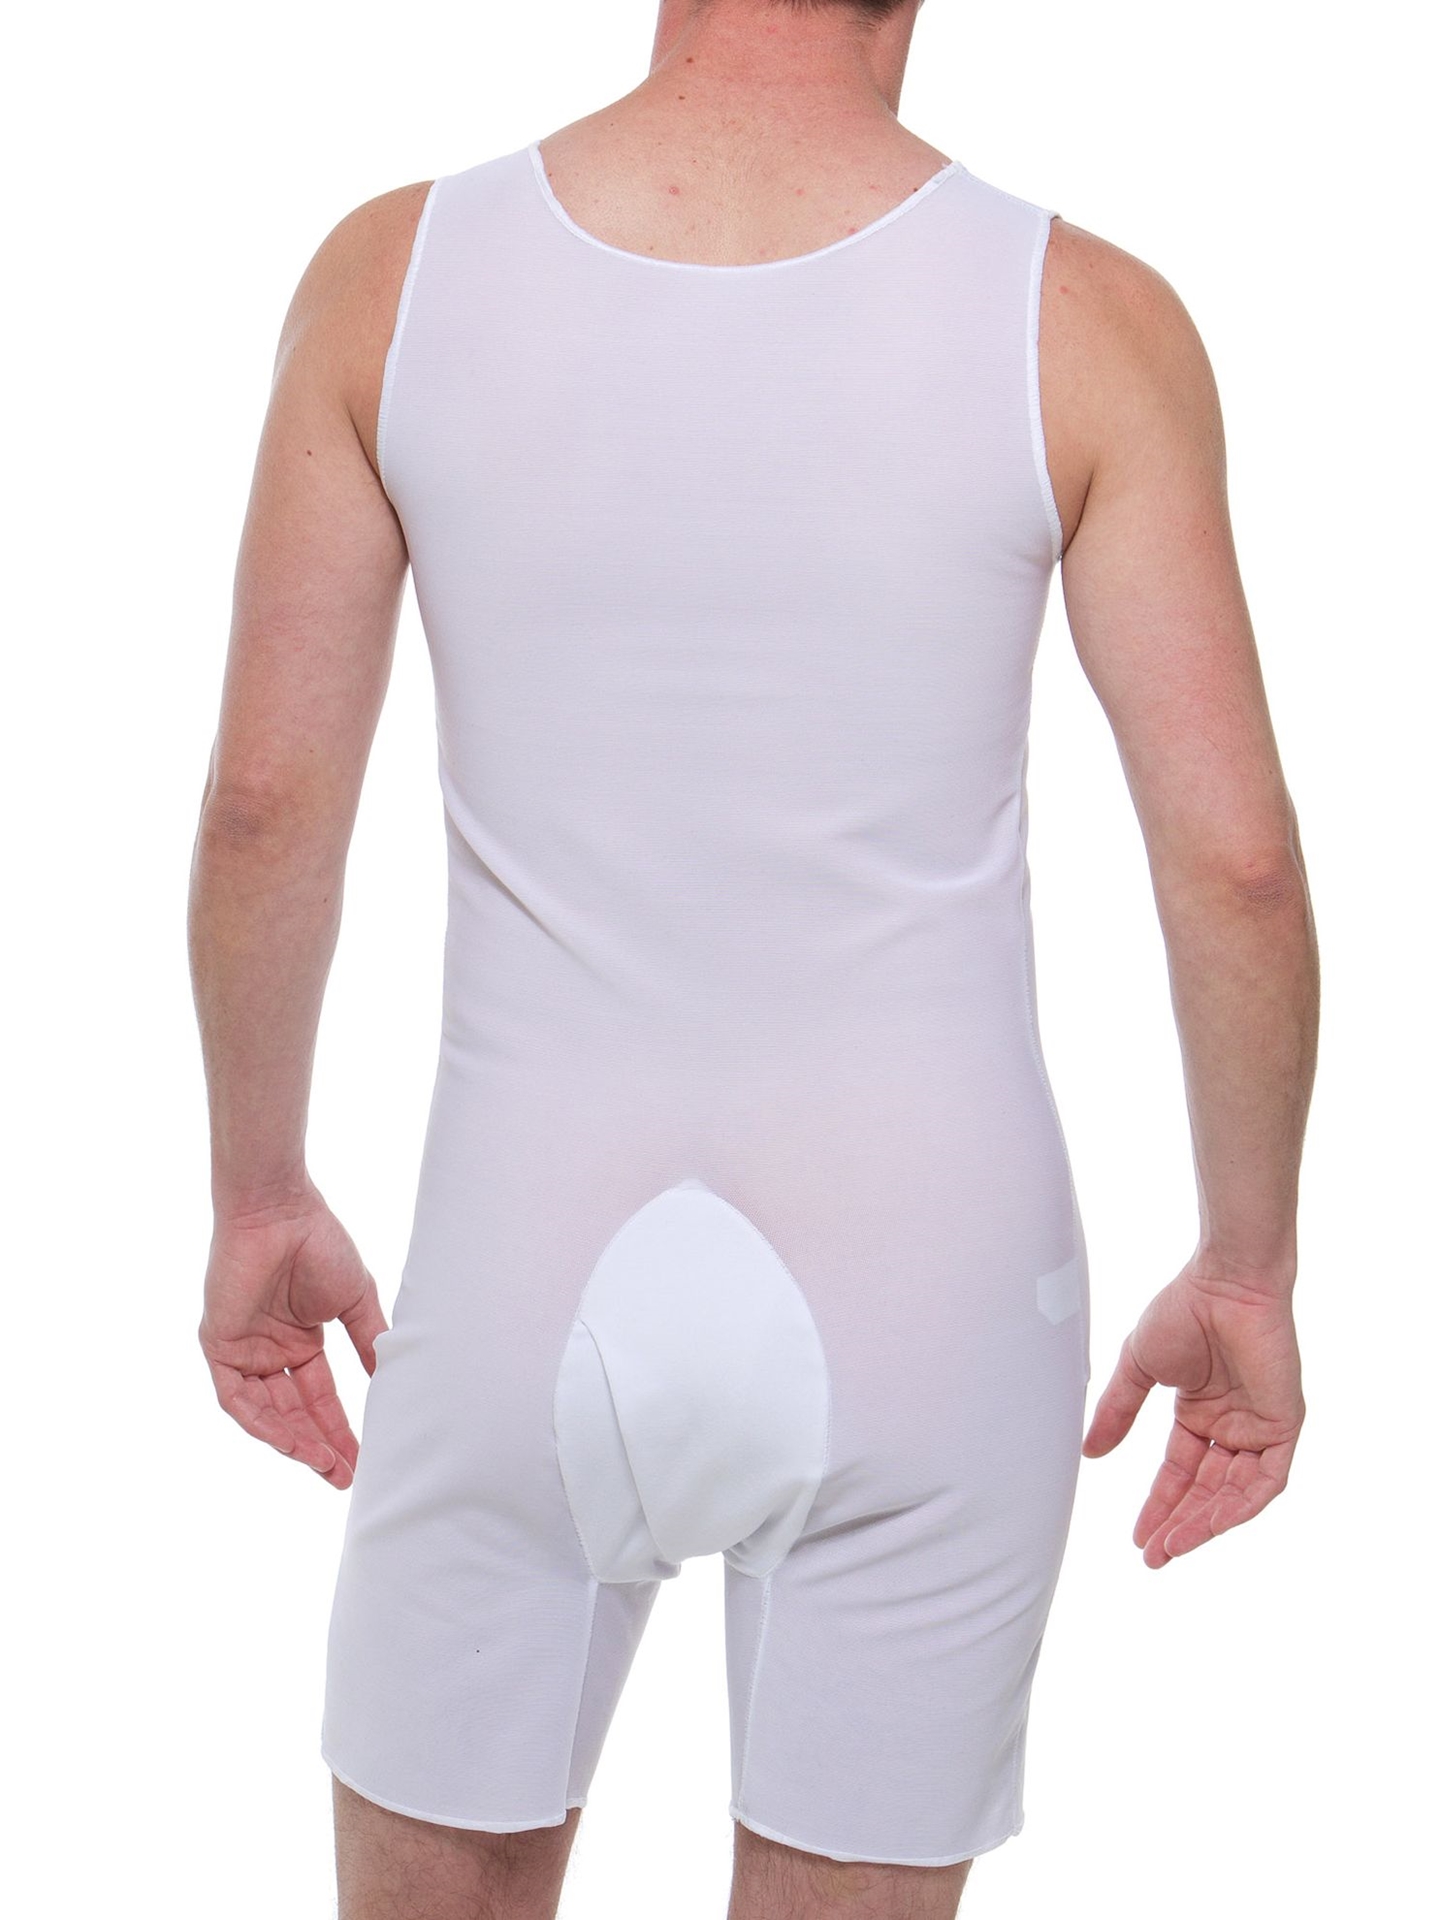 Ultimate Chest Binder Tanksuit. FTM Chest Binders for Trans Men by